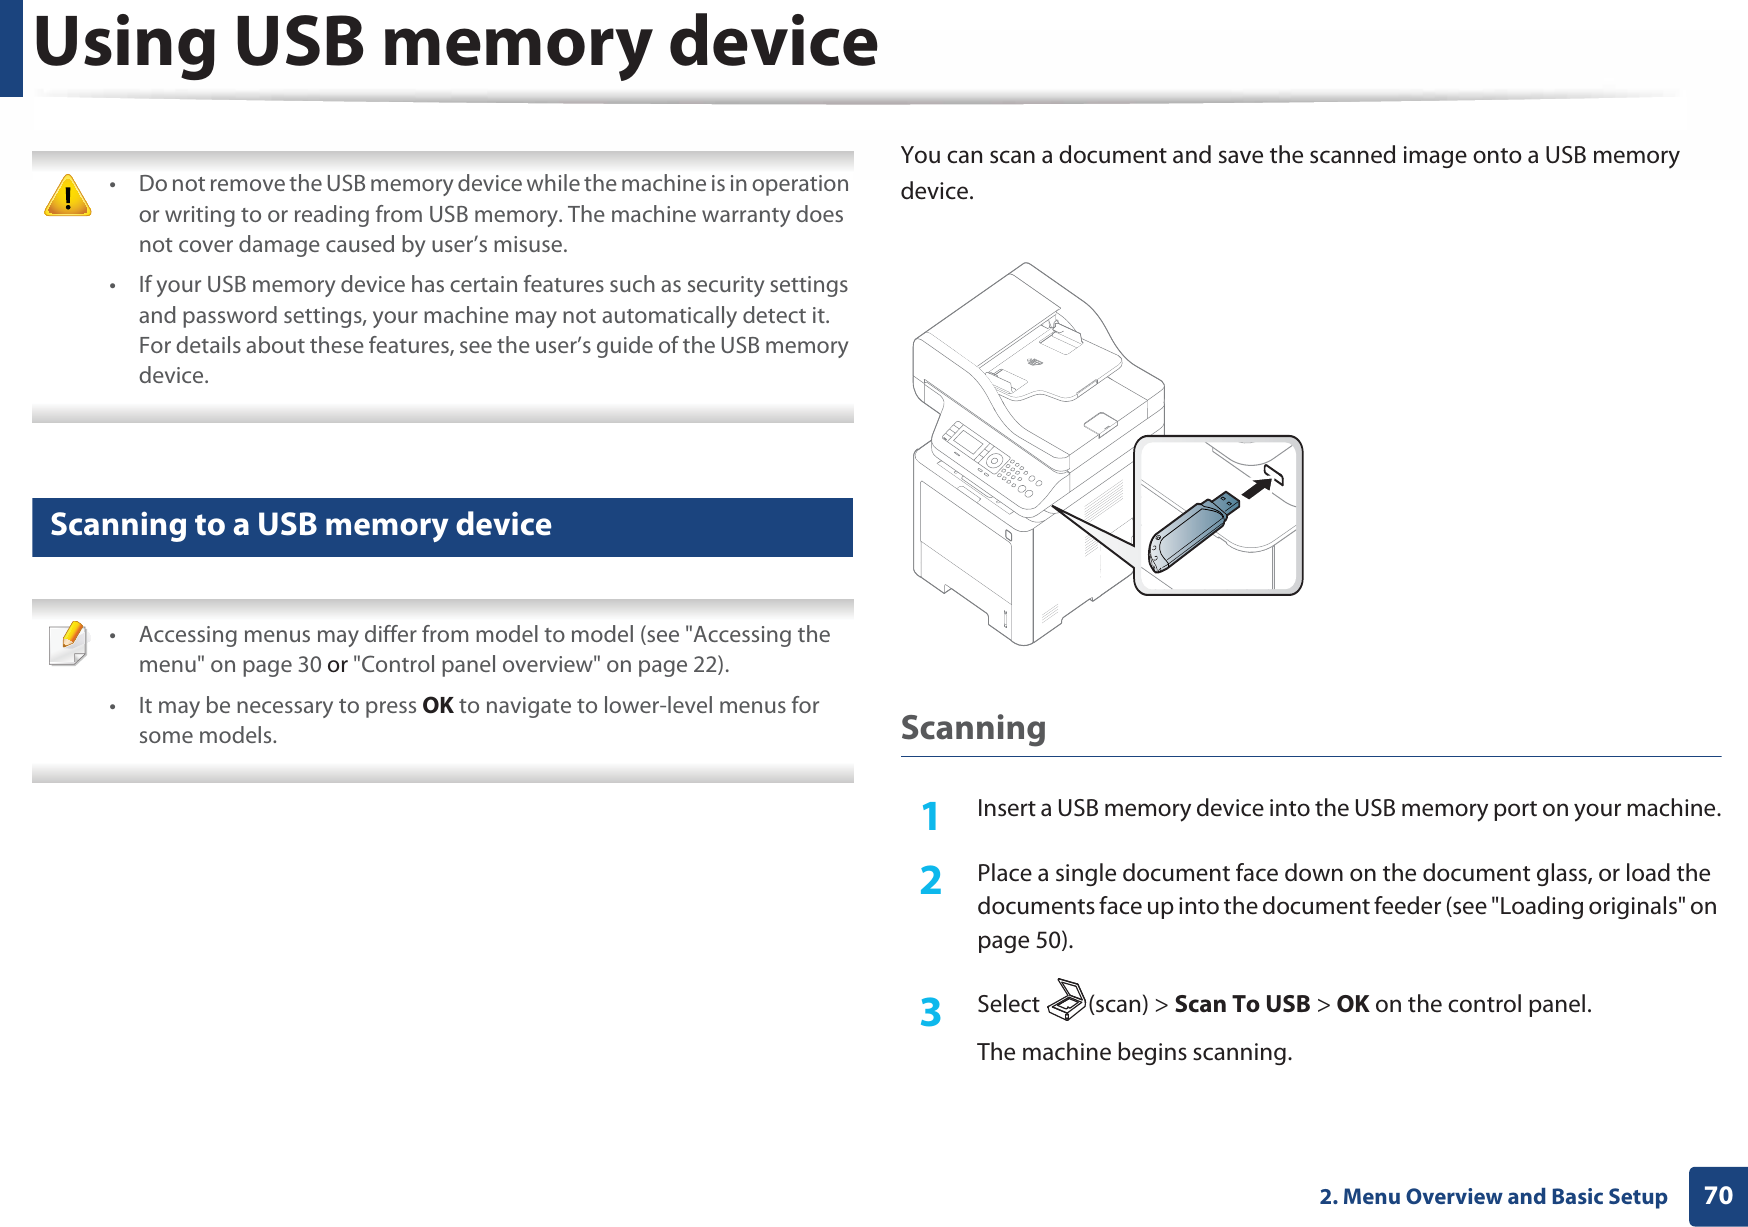 Using USB memory device702. Menu Overview and Basic Setup • Do not remove the USB memory device while the machine is in operation or writing to or reading from USB memory. The machine warranty does not cover damage caused by user’s misuse. • If your USB memory device has certain features such as security settings and password settings, your machine may not automatically detect it. For details about these features, see the user’s guide of the USB memory device. 25 Scanning to a USB memory device • Accessing menus may differ from model to model (see &quot;Accessing the menu&quot; on page 30 or &quot;Control panel overview&quot; on page 22).• It may be necessary to press OK to navigate to lower-level menus for some models. You can scan a document and save the scanned image onto a USB memory device.Scanning1Insert a USB memory device into the USB memory port on your machine.2  Place a single document face down on the document glass, or load the documents face up into the document feeder (see &quot;Loading originals&quot; on page 50).3  Select (scan) &gt; Scan To USB &gt; OK on the control panel.The machine begins scanning.